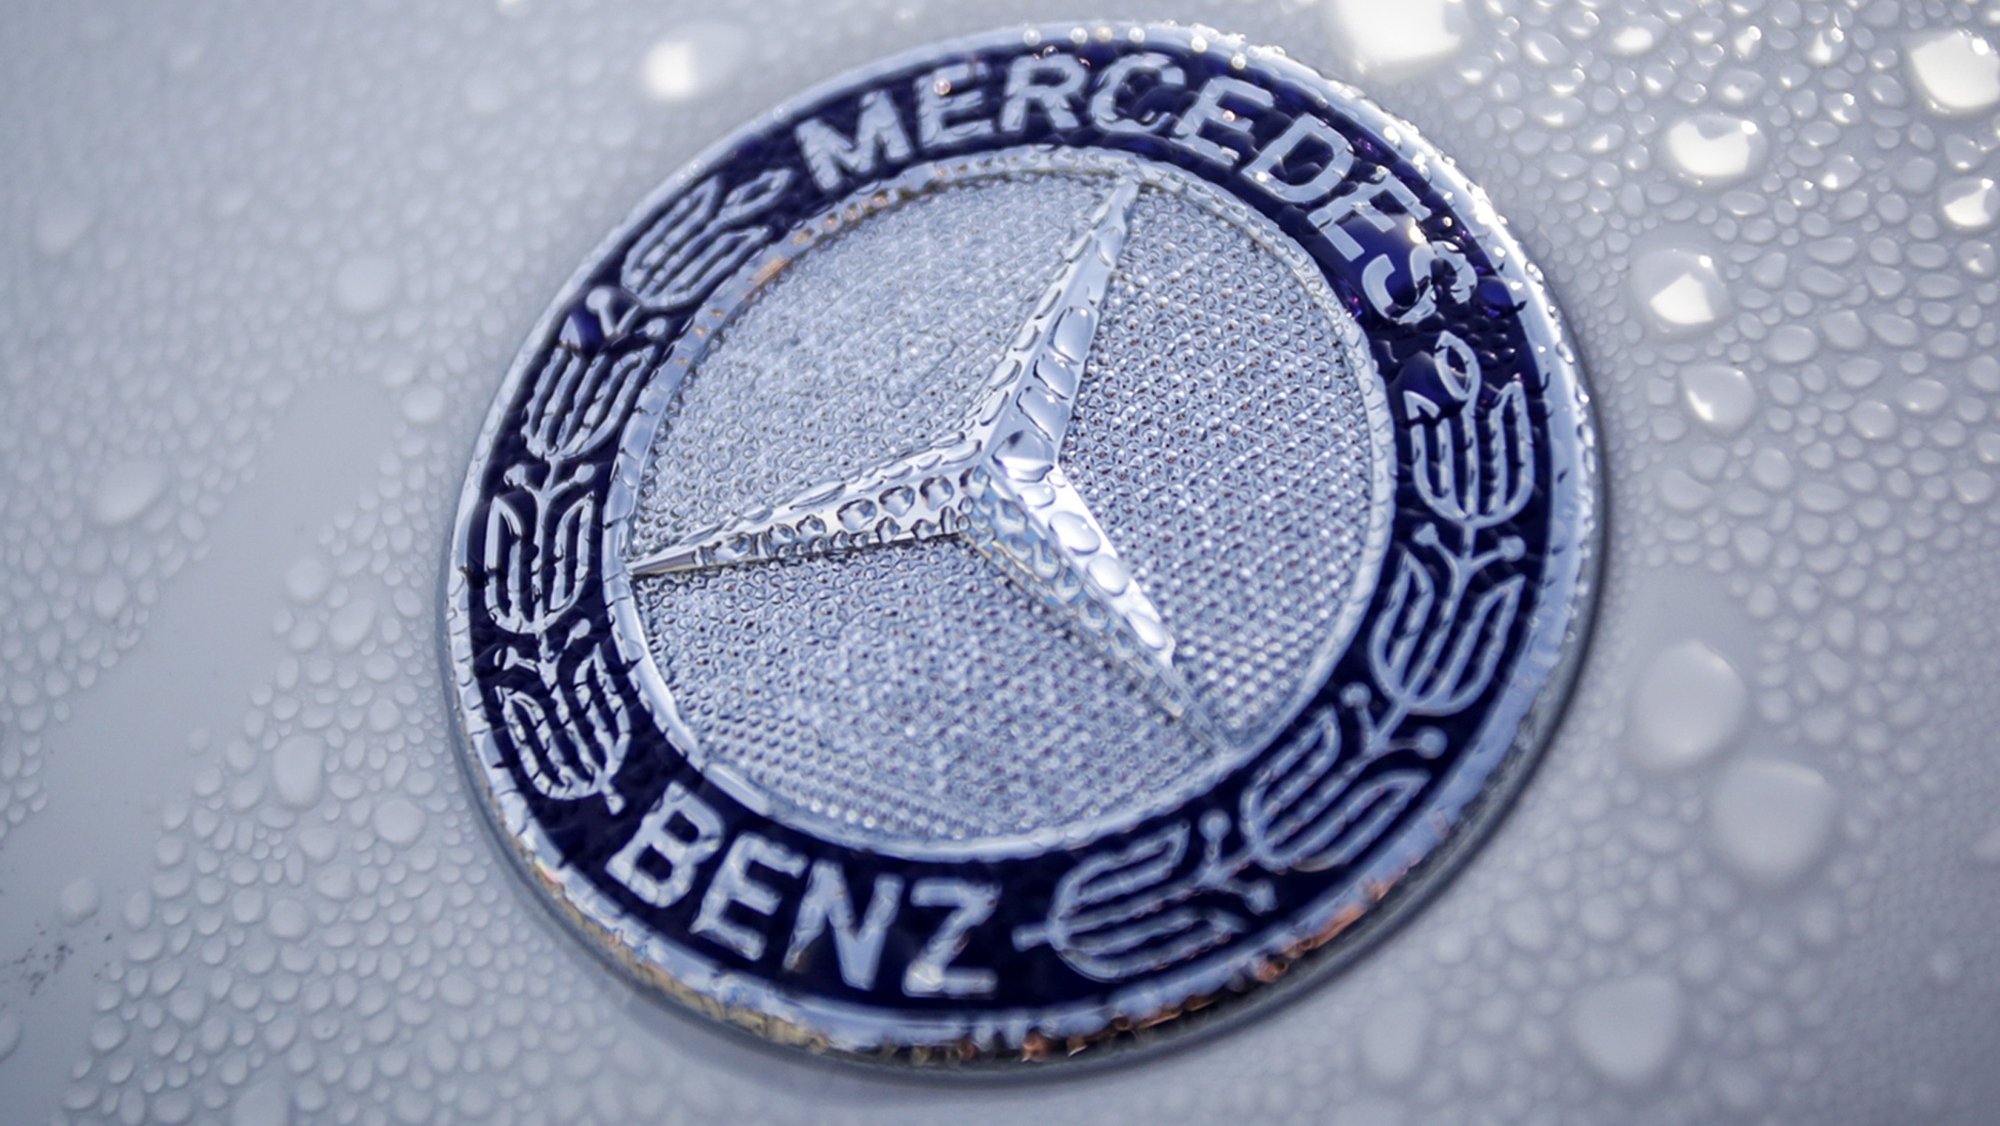 epa07486360 (FILE) - A logo of car maker Mercedes Benz is pictured on a new car at the port of  Bremerhaven, northern Germany, 03 March 2017 (reissued 05 April 2019). Media reports on 05 April 2019 state the EU commission regulators in a statement have charged German carmakers Daimler, Volkswagen and BMW of collusion in the area of emissions cleaning technology by &#039;participating in a collusive scheme, in breach of EU competition rules, to limit the development and roll-out of emission-cleaning technology for new diesel and petrol passenger cars sold in the European Economic Area&#039;.  EPA/FOCKE STRANGMANN